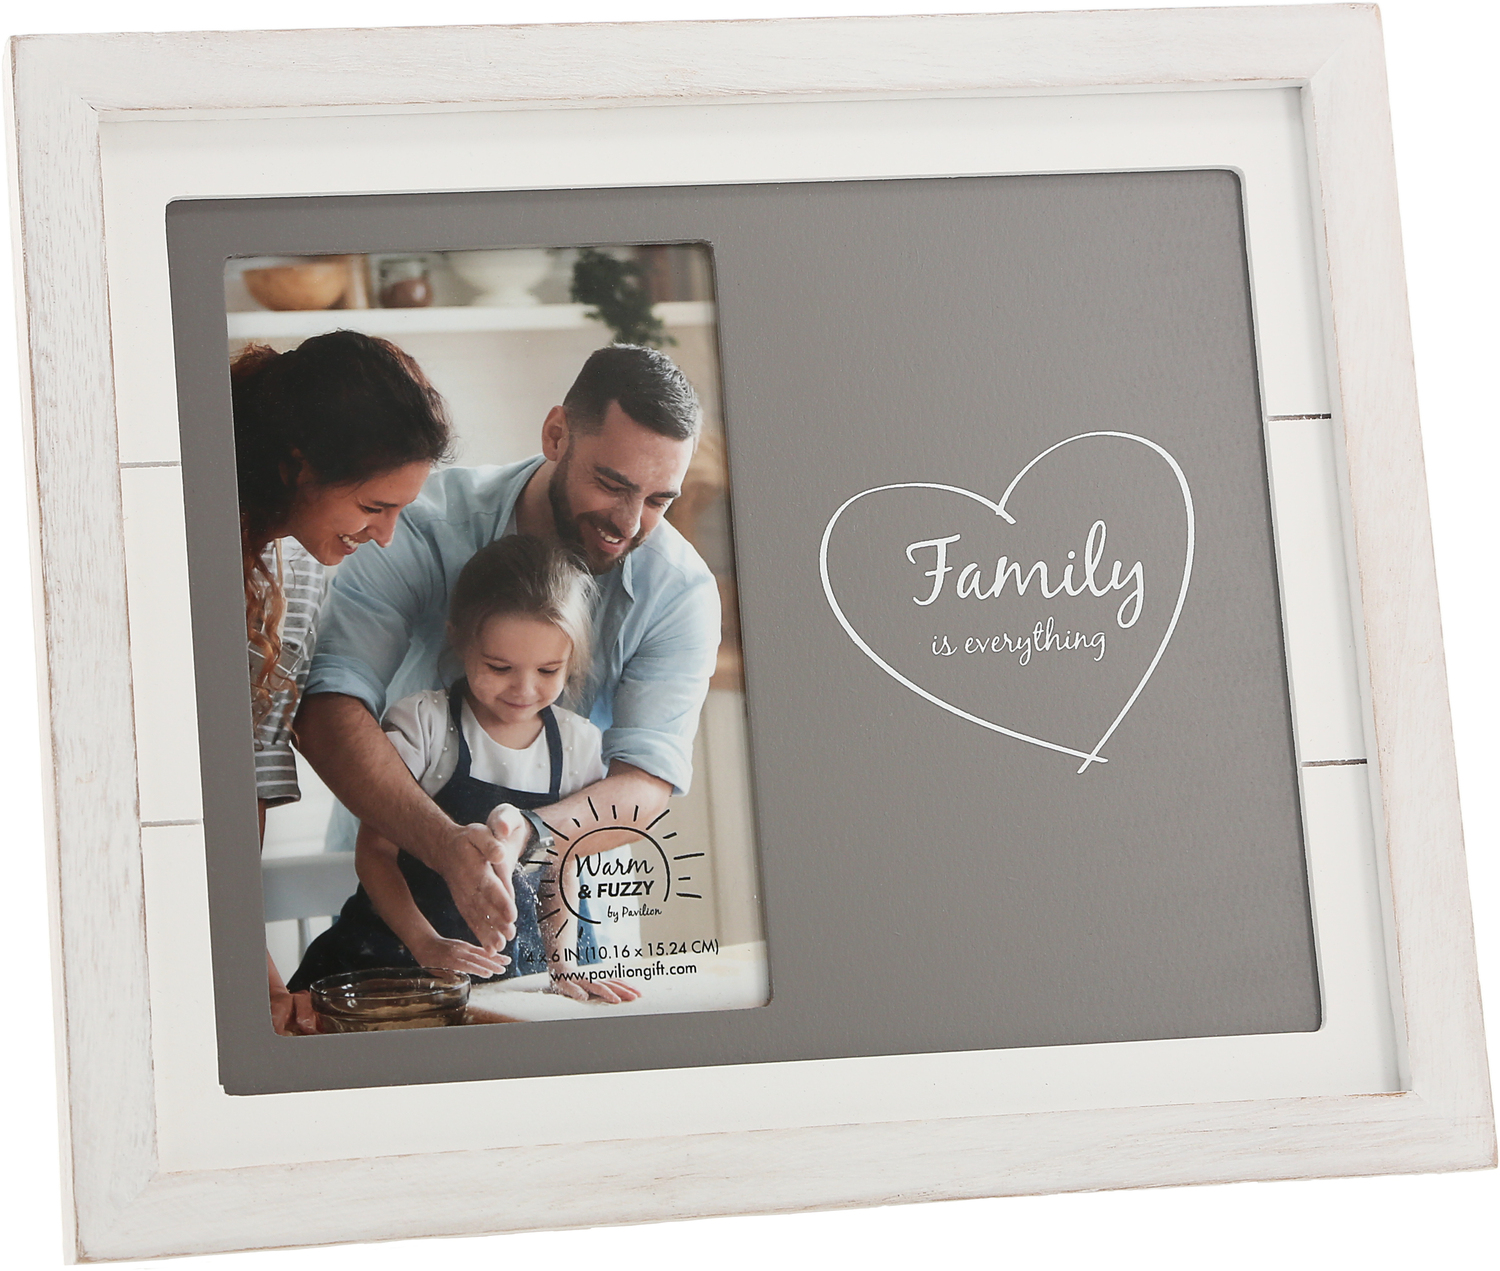 Family by Warm and Fuzzy - Family - 10" x 8.5" Frame (Holds 4" x 6" Photo)